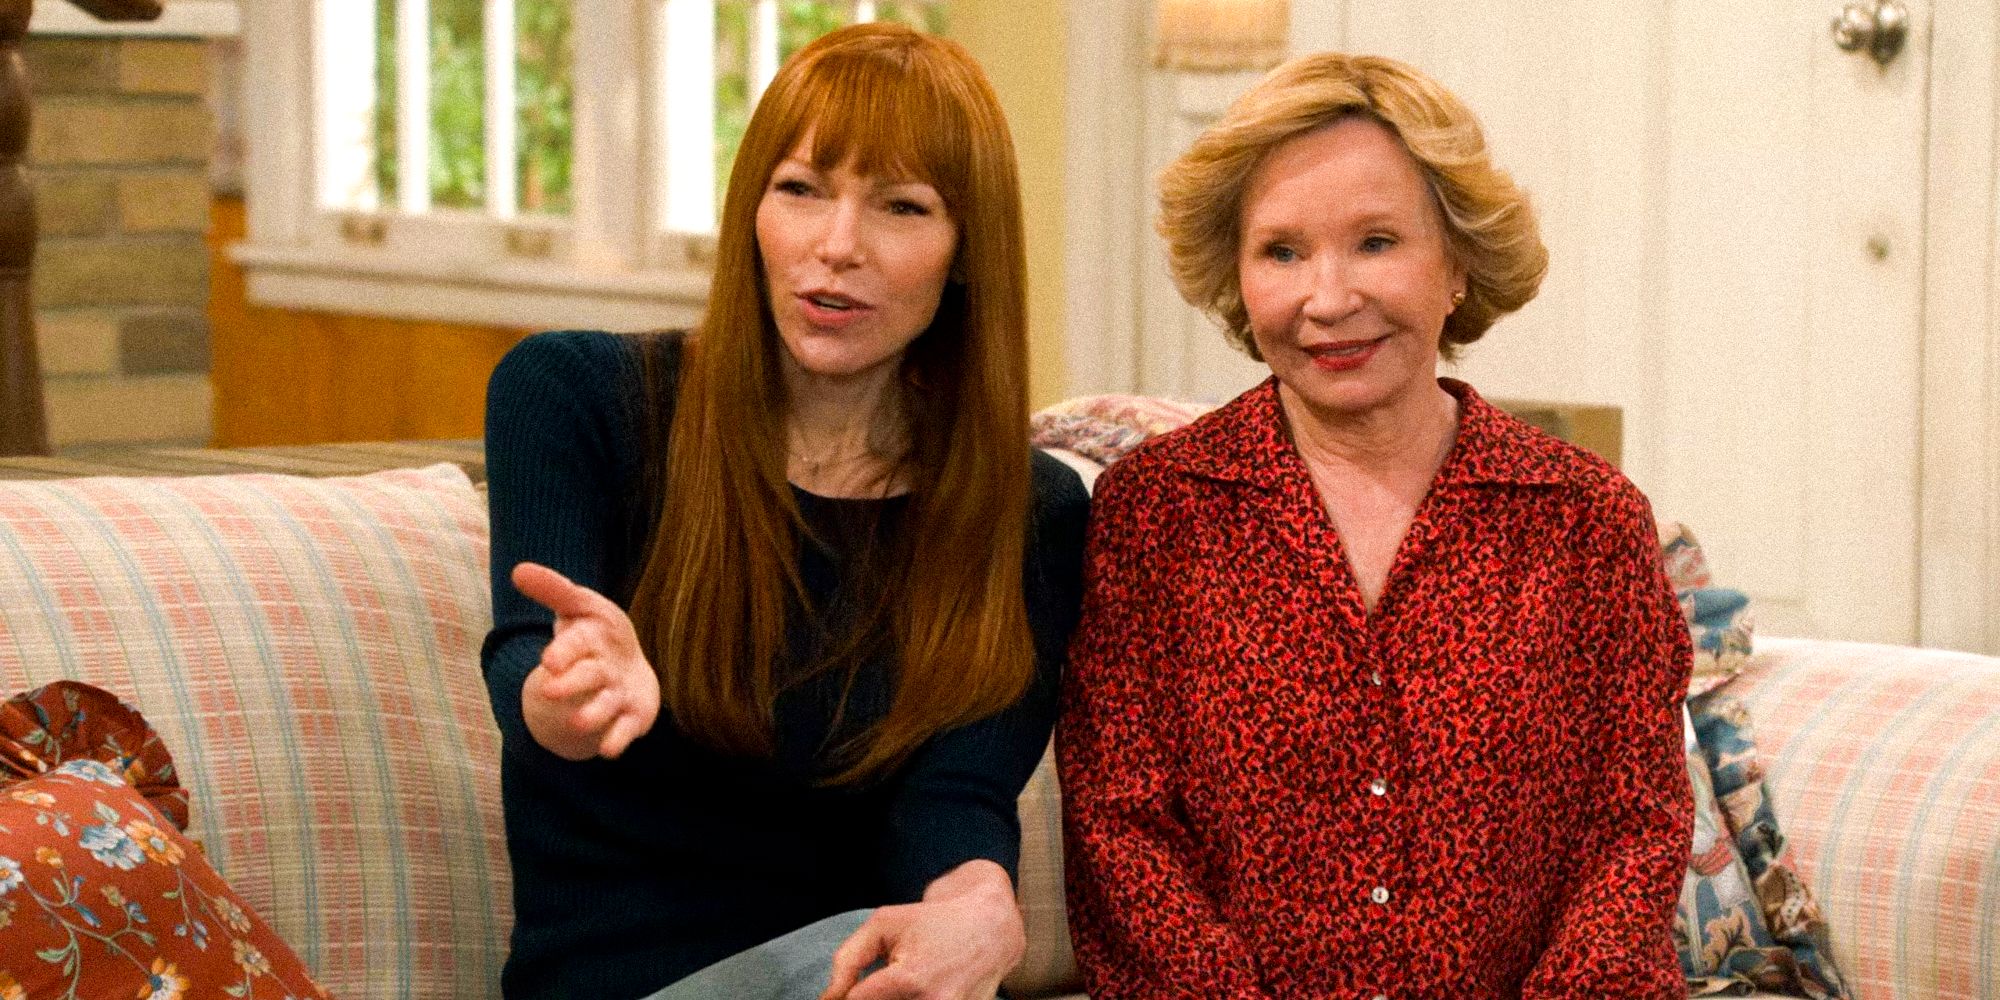 Donna (Laura Prepon) and Kitty (Debra Jo Rupp) in That 90s show part 2 Episode 2